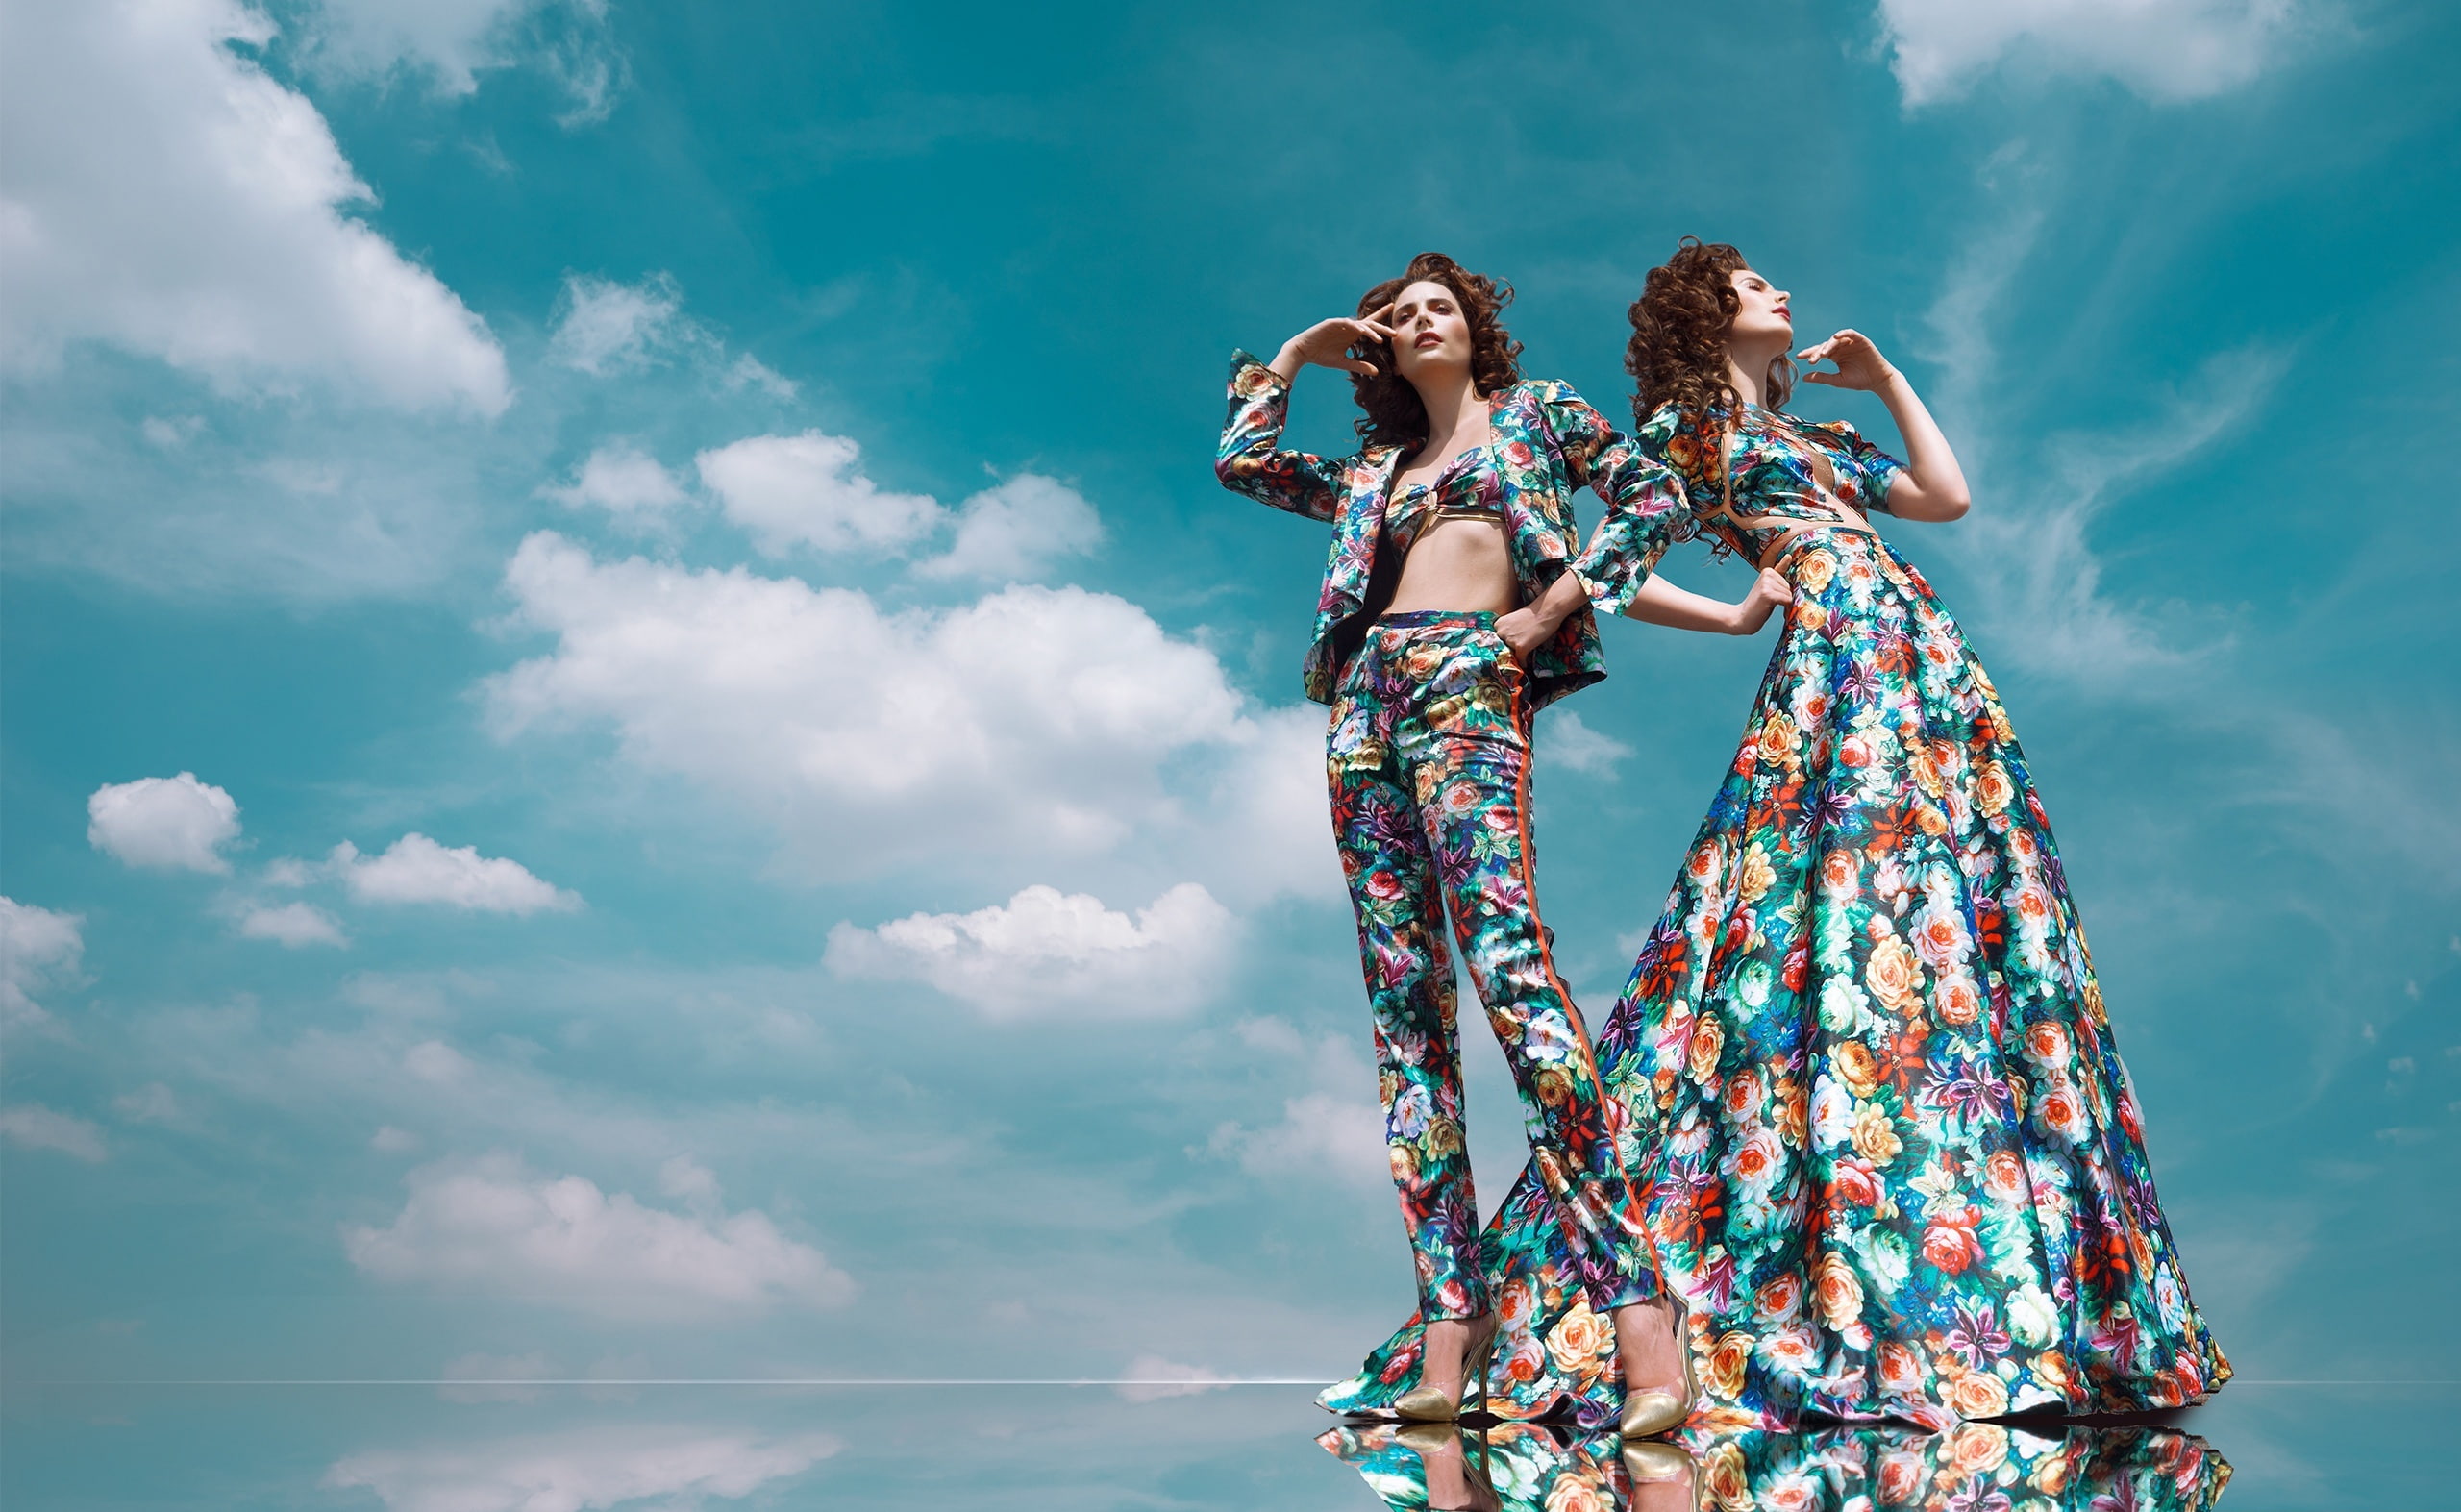 Summer, Floral Prints Clothing, Models, Sky, Girls, Style, People